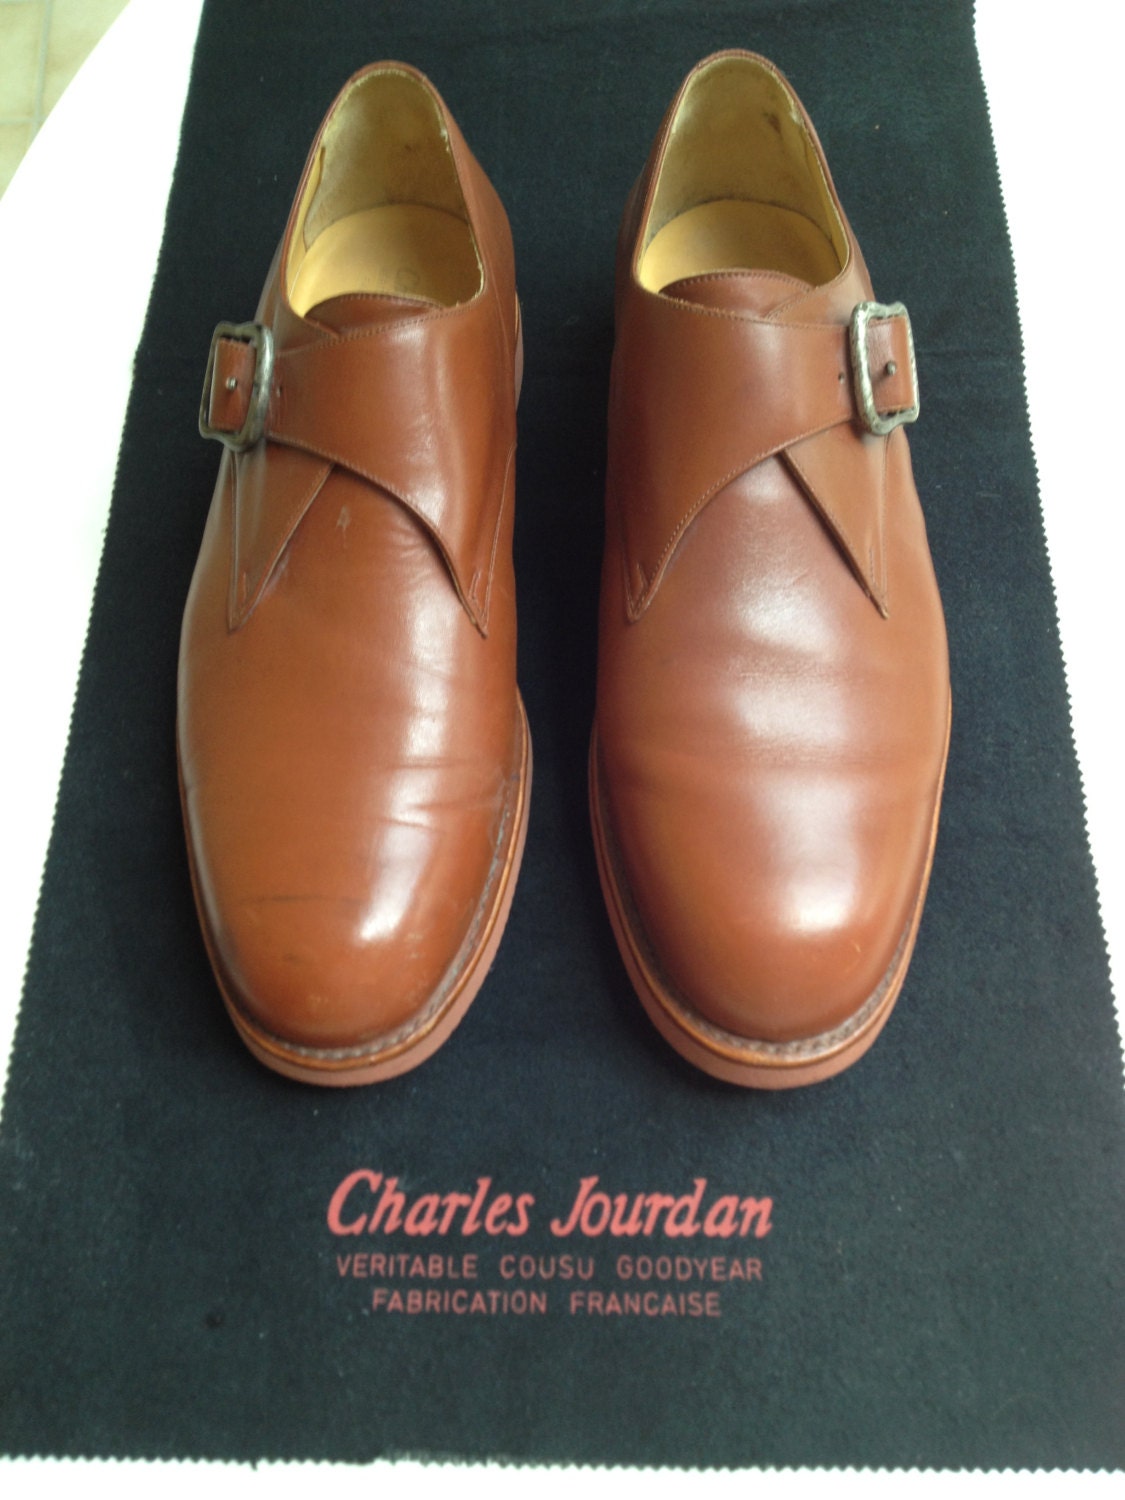 Mens Vintage Charles Jourdan Shoes Worn only Once or Twice